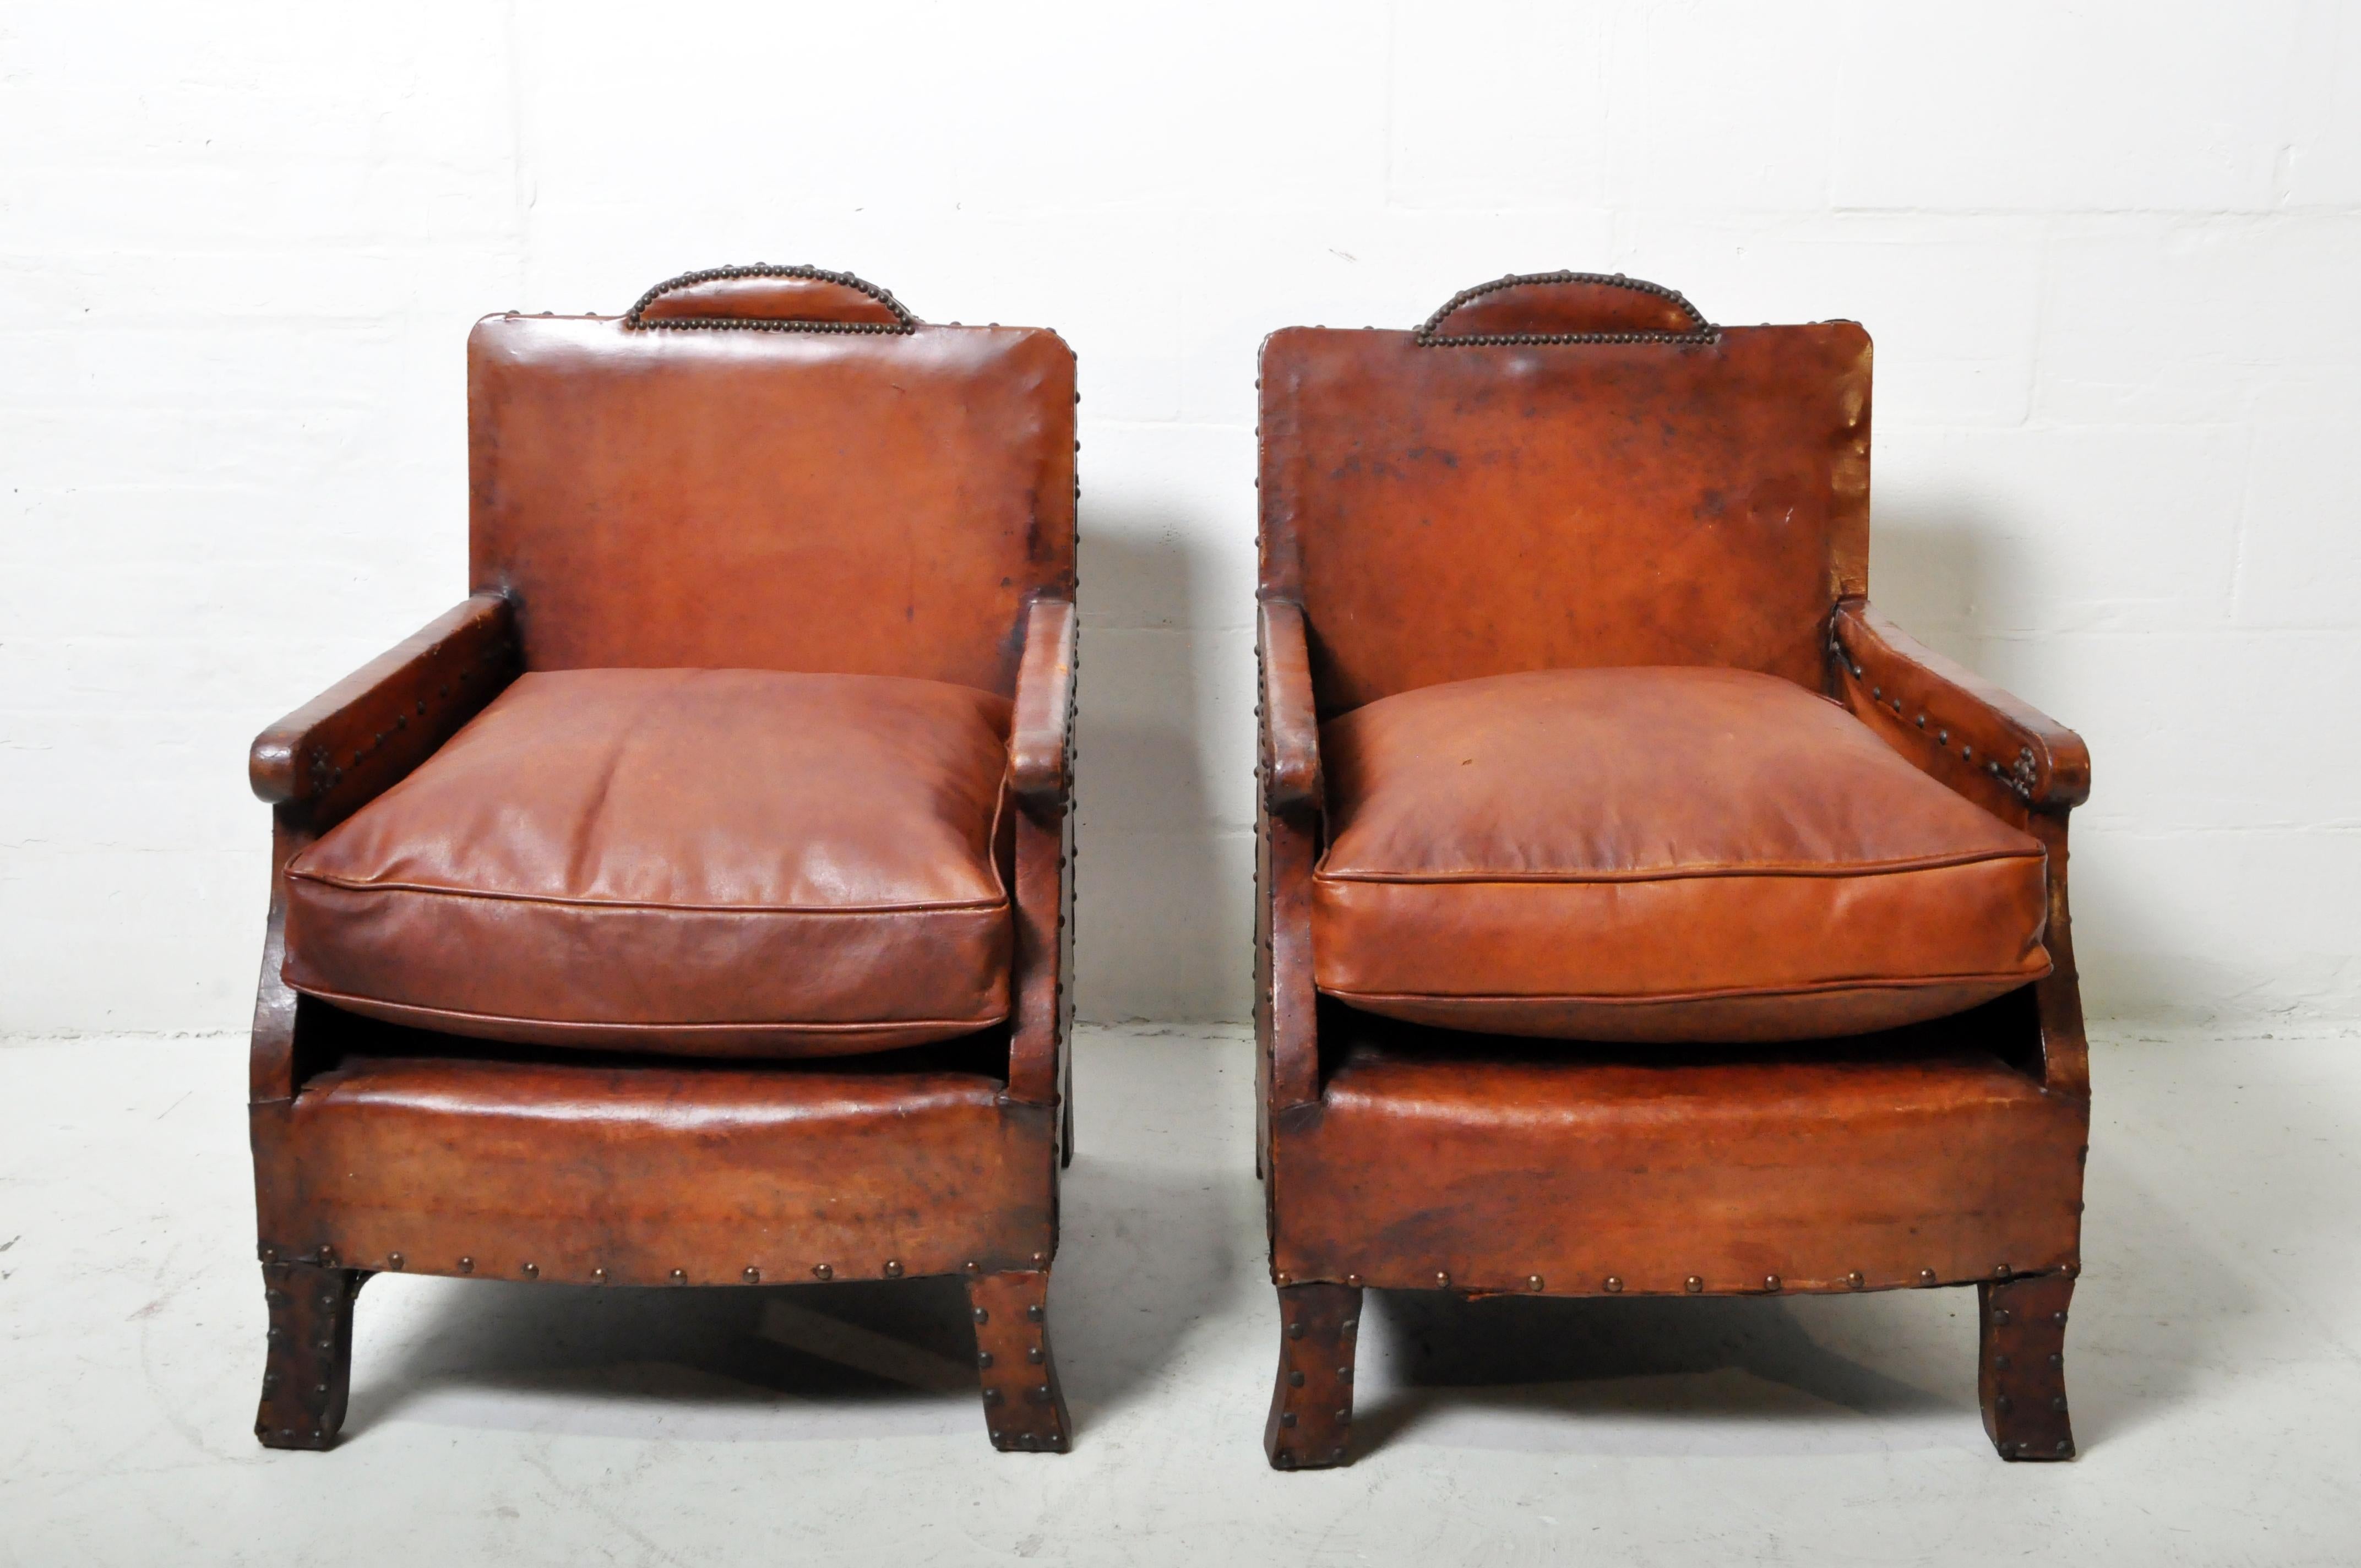 An exceptional pair of petit vintage French Art Deco leather club chairs. The leather is in good condition with excellent patina and only expected and modest scratches, repaired tears and other imperfections of age. The original leather seat